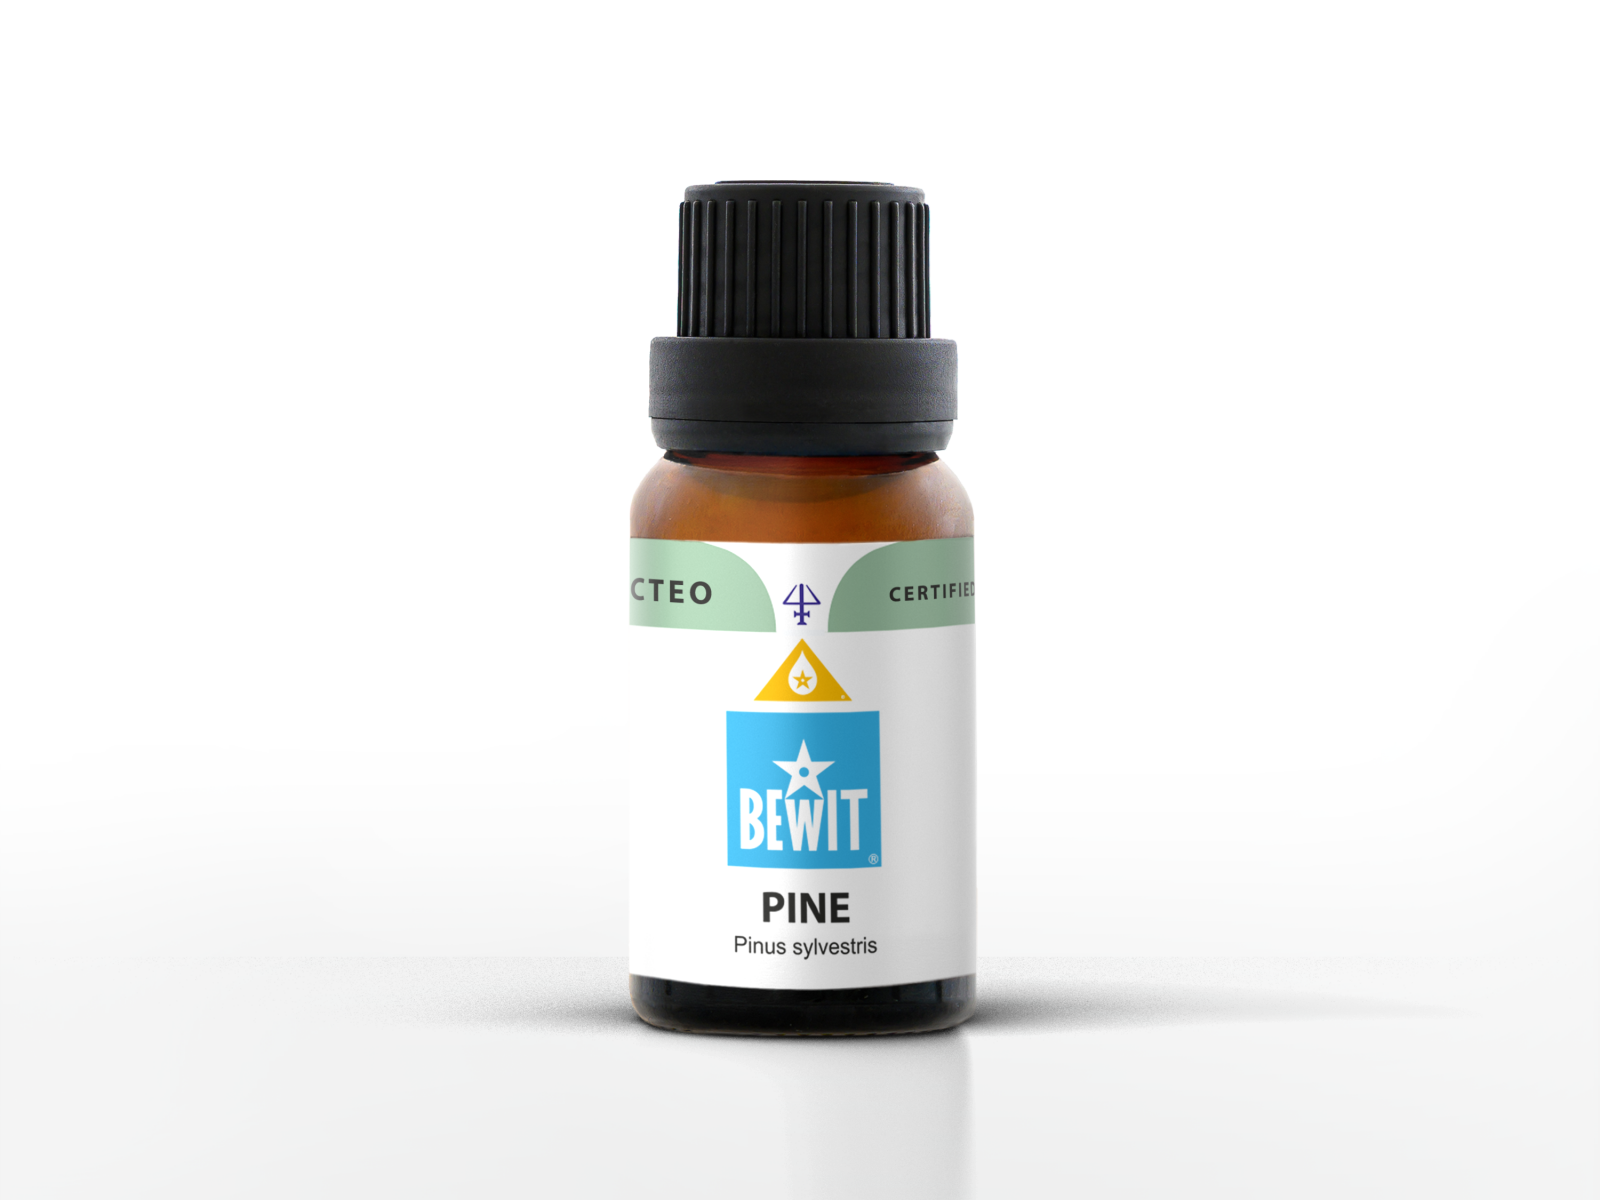 BEWIT Pine - This is a 100% pure essential oil - 2